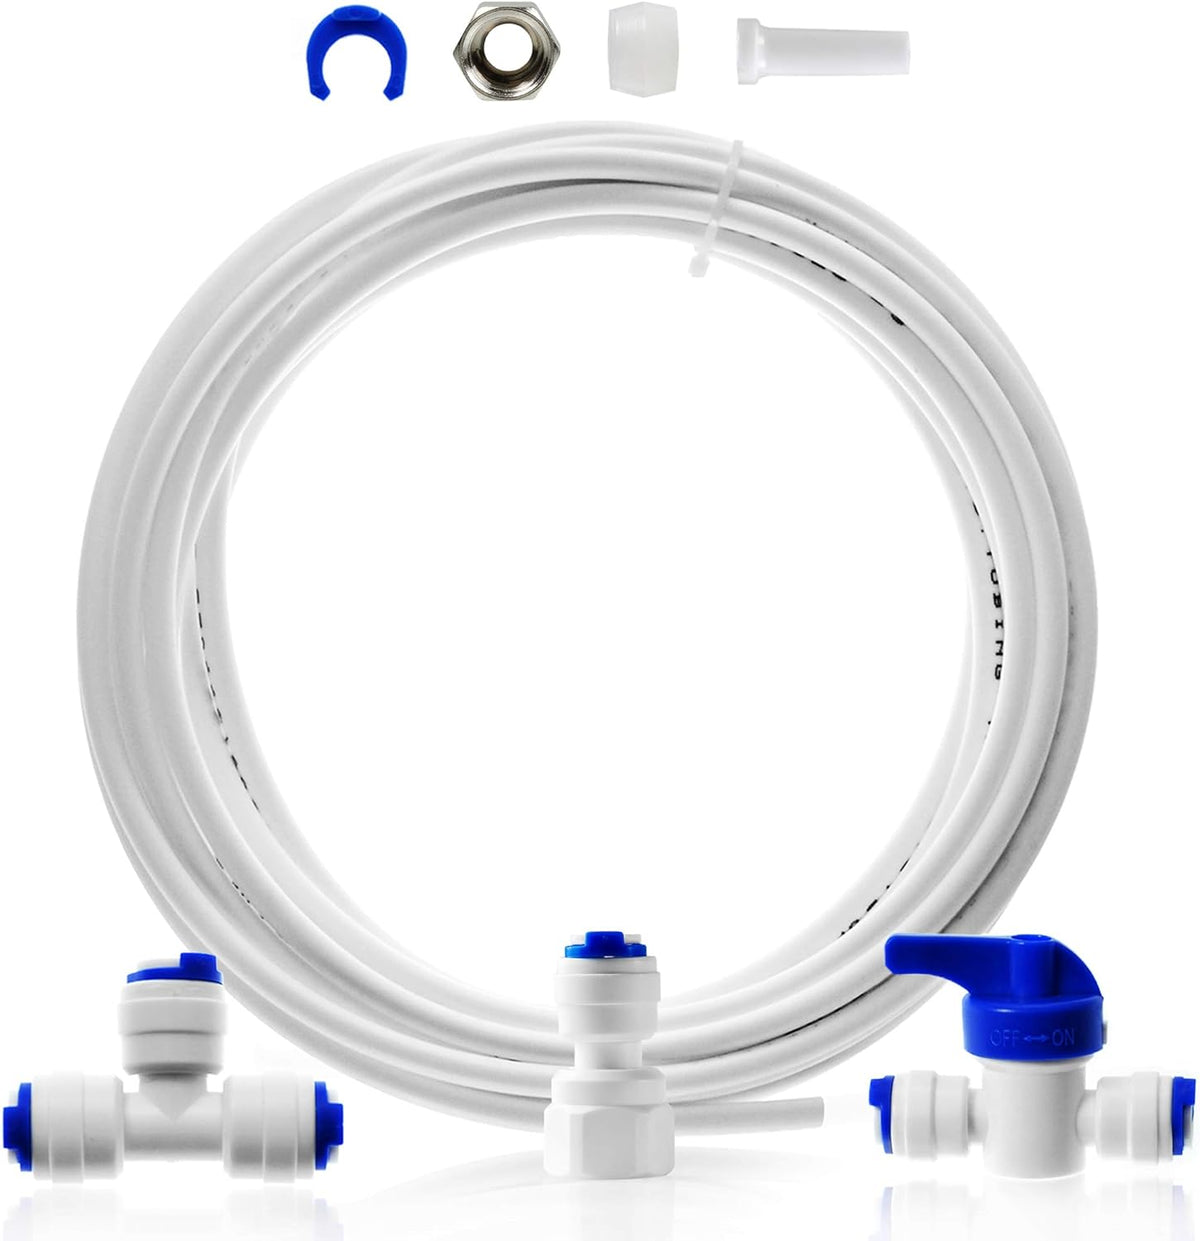 Drinkpod Fridge Water Line Connection and Ice Maker Installation Kit for Reverse Osmosis RO Systems &amp; Water Filters, 1/4&quot;, 20 feet